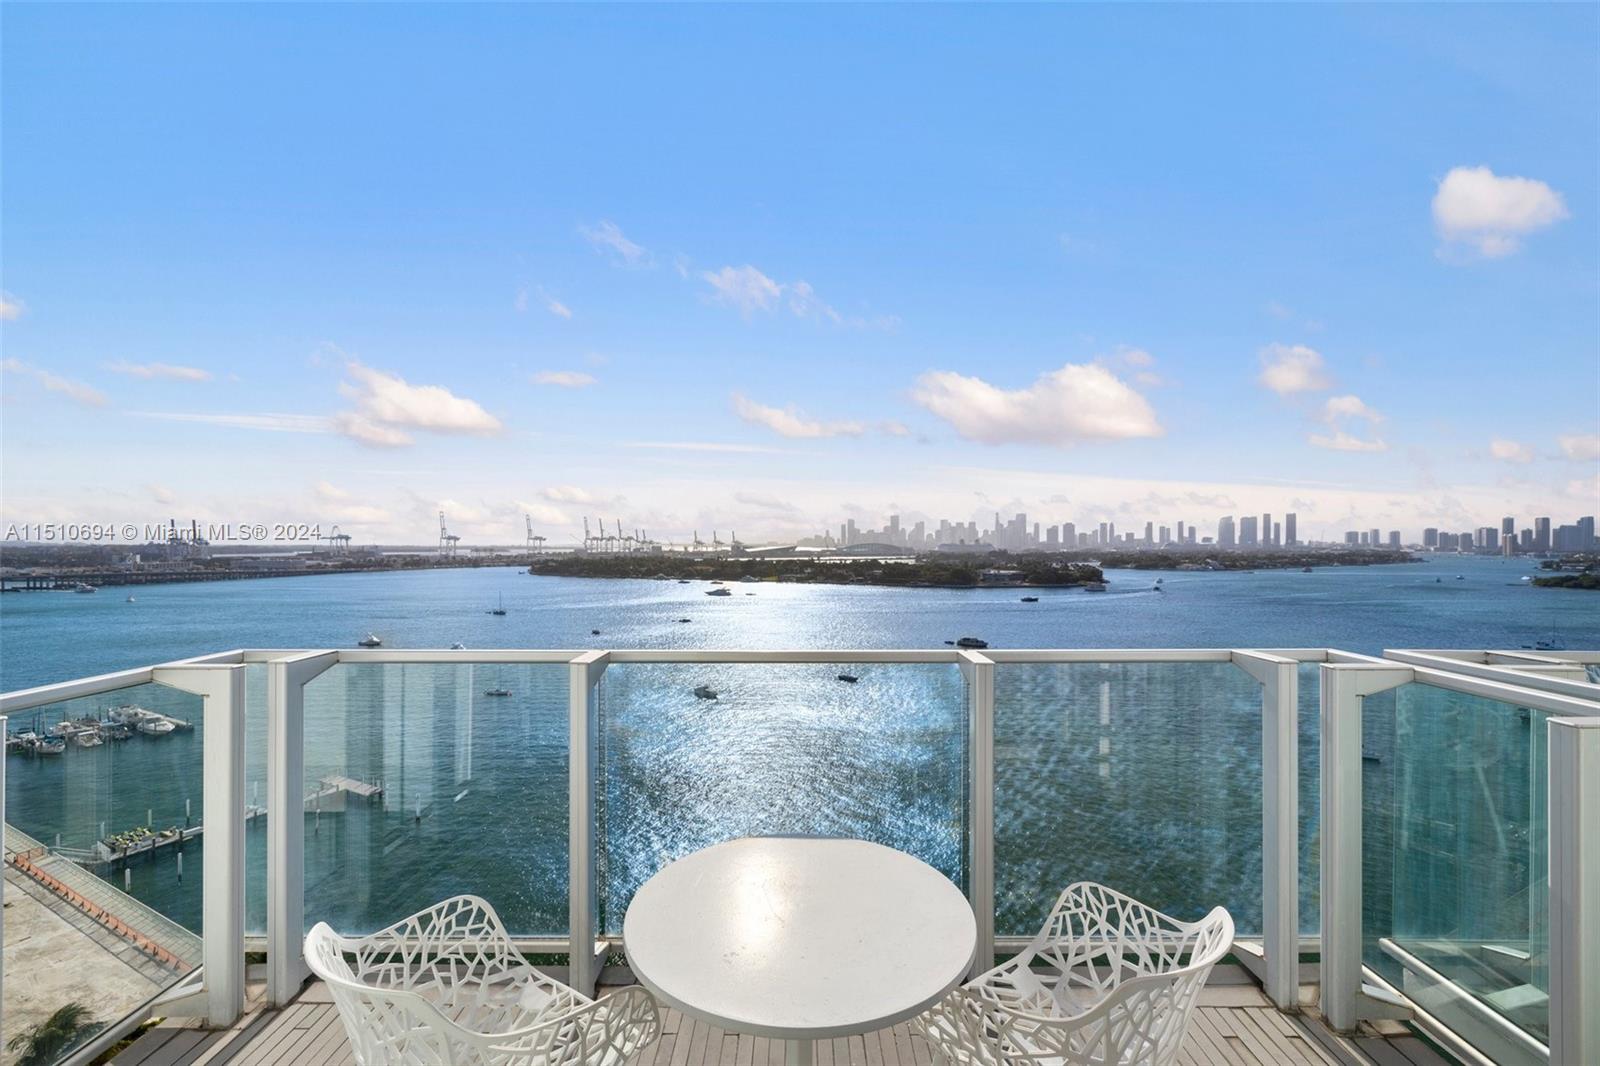 Turn-key fully furnished 1 bedroom/1 bathroom Penthouse with spacious balcony and direct bay, skyline and sunset views in one of Miami's trendiest 5-star condo-hotels. Enjoy full access to the newly renovated amenities including heated Bayfront pool, spa, gym, indoor and outdoor bars, restaurants and concierge services. No rental restrictions, daily rentals OK. Perfect investment property to rent out, use as a vacation home or both.